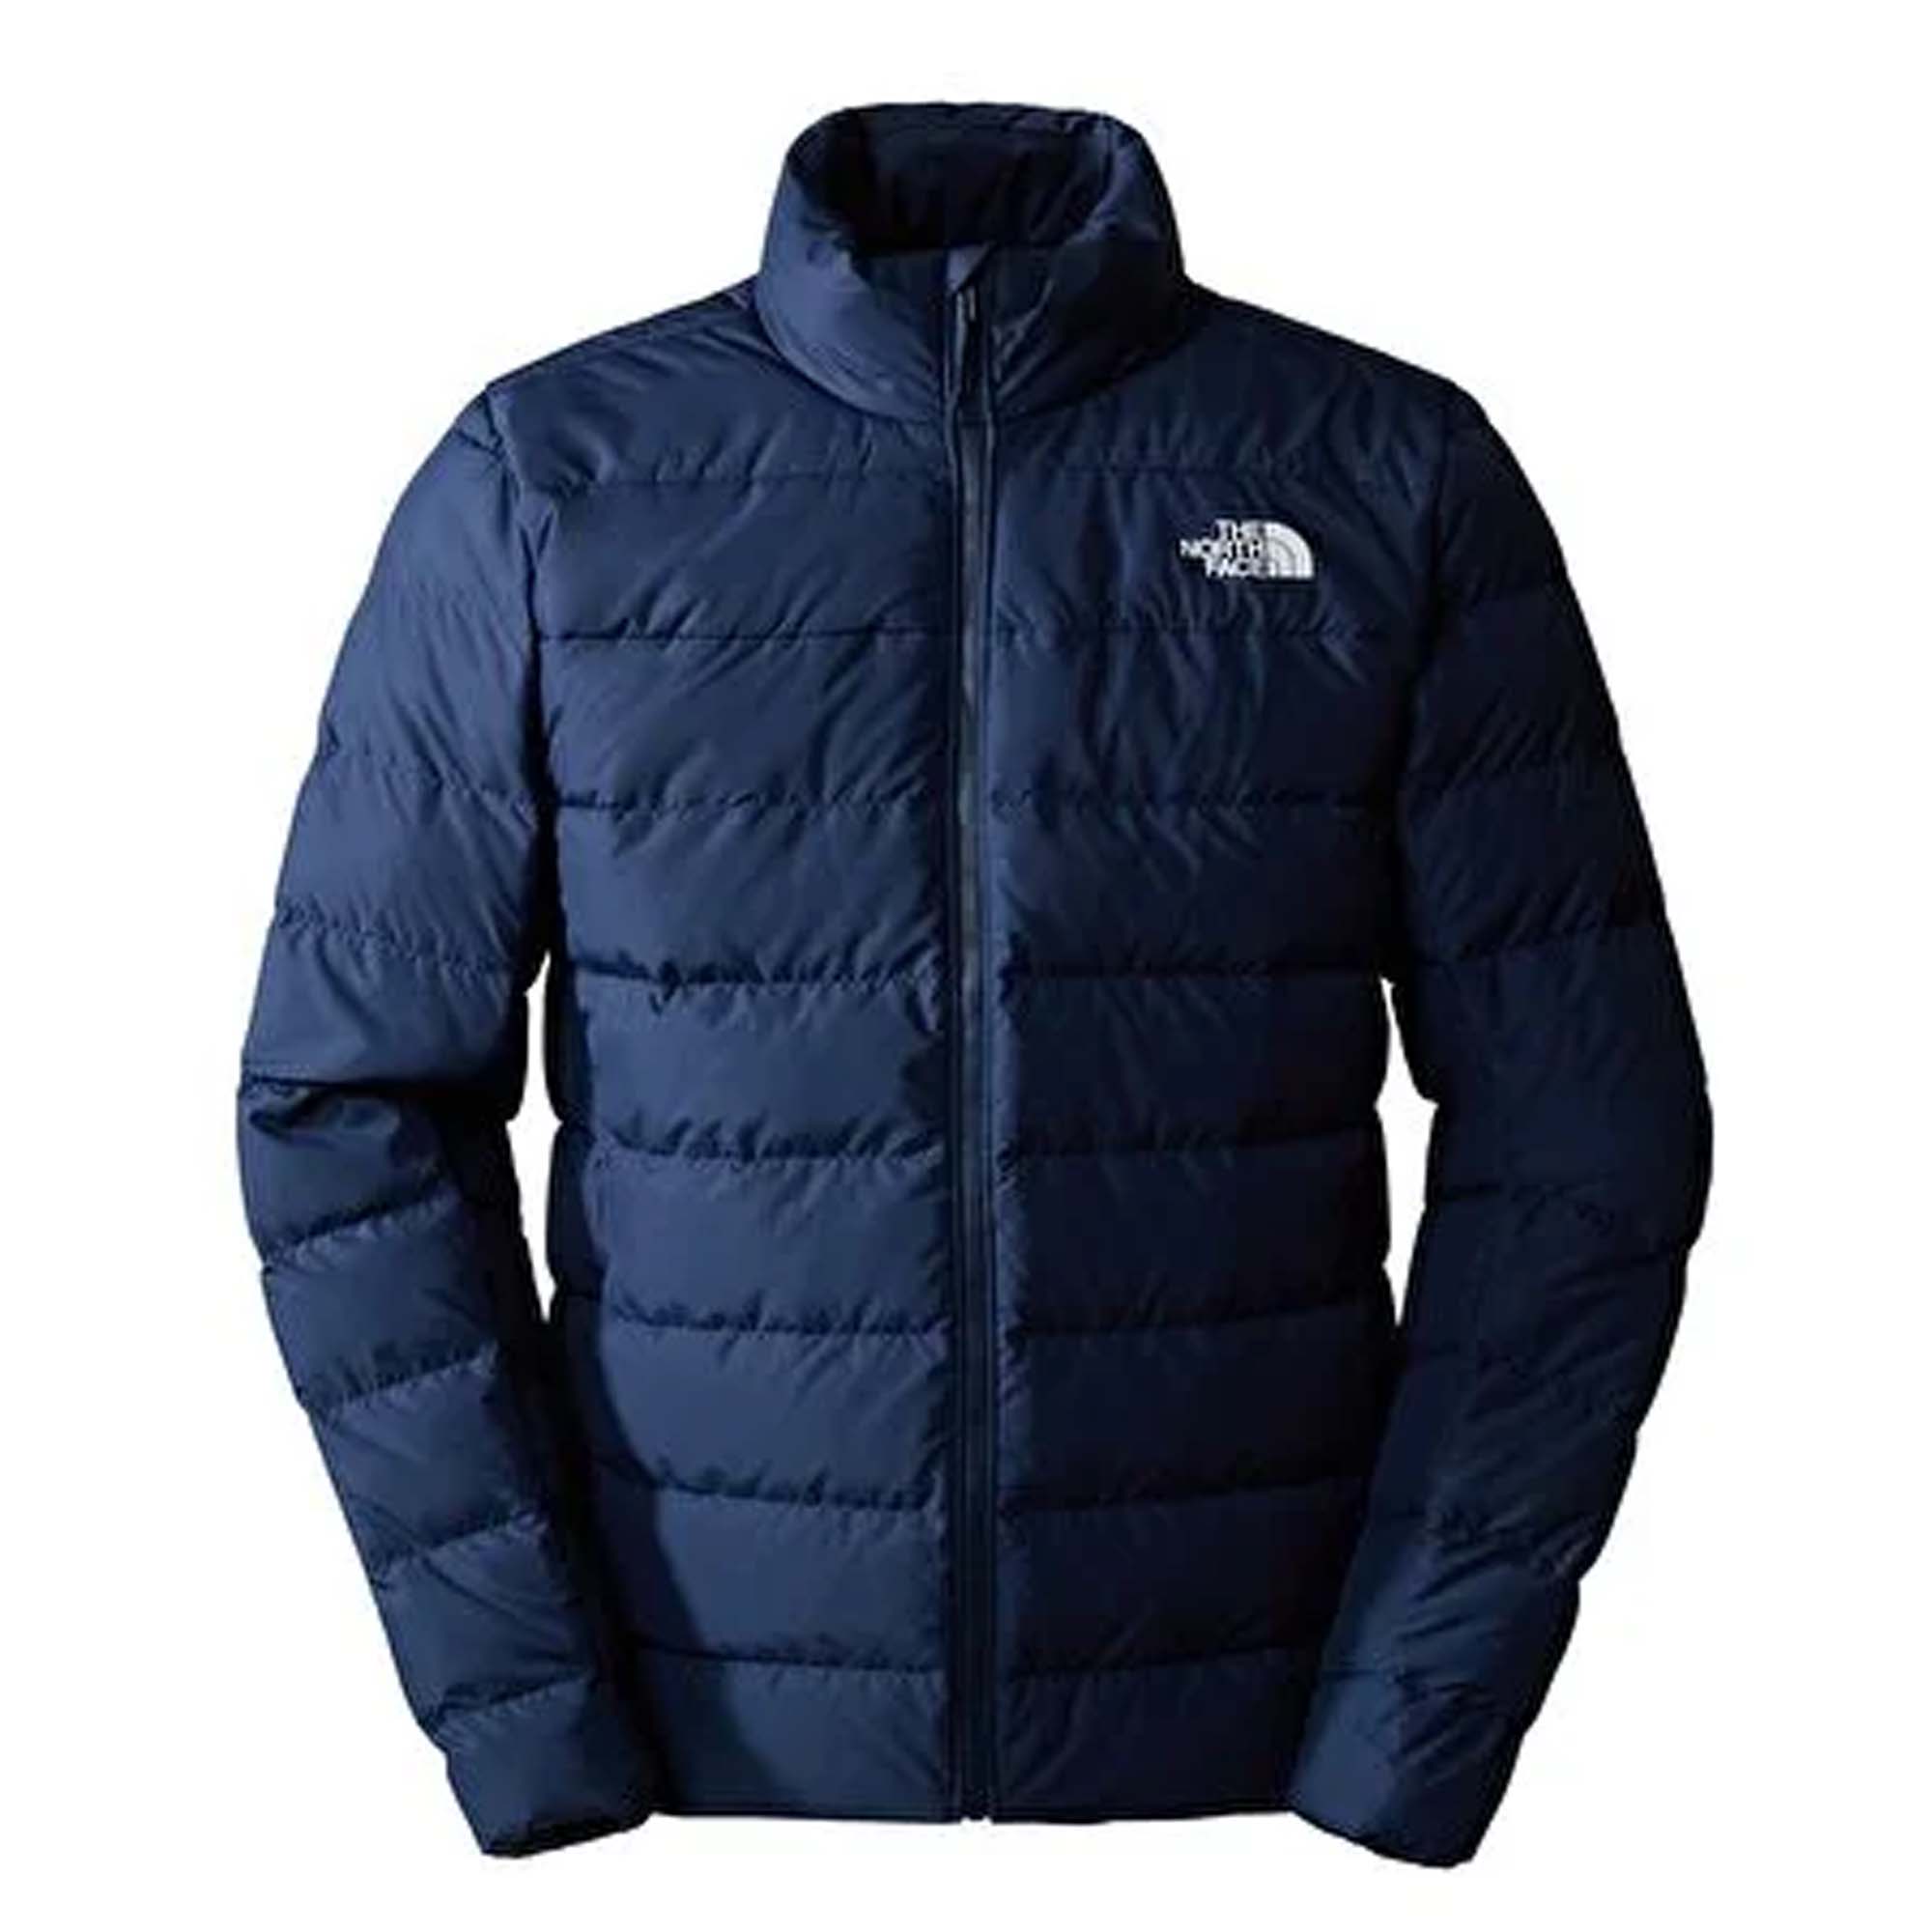 THE NORTH FACE aconcagua 3 jacket